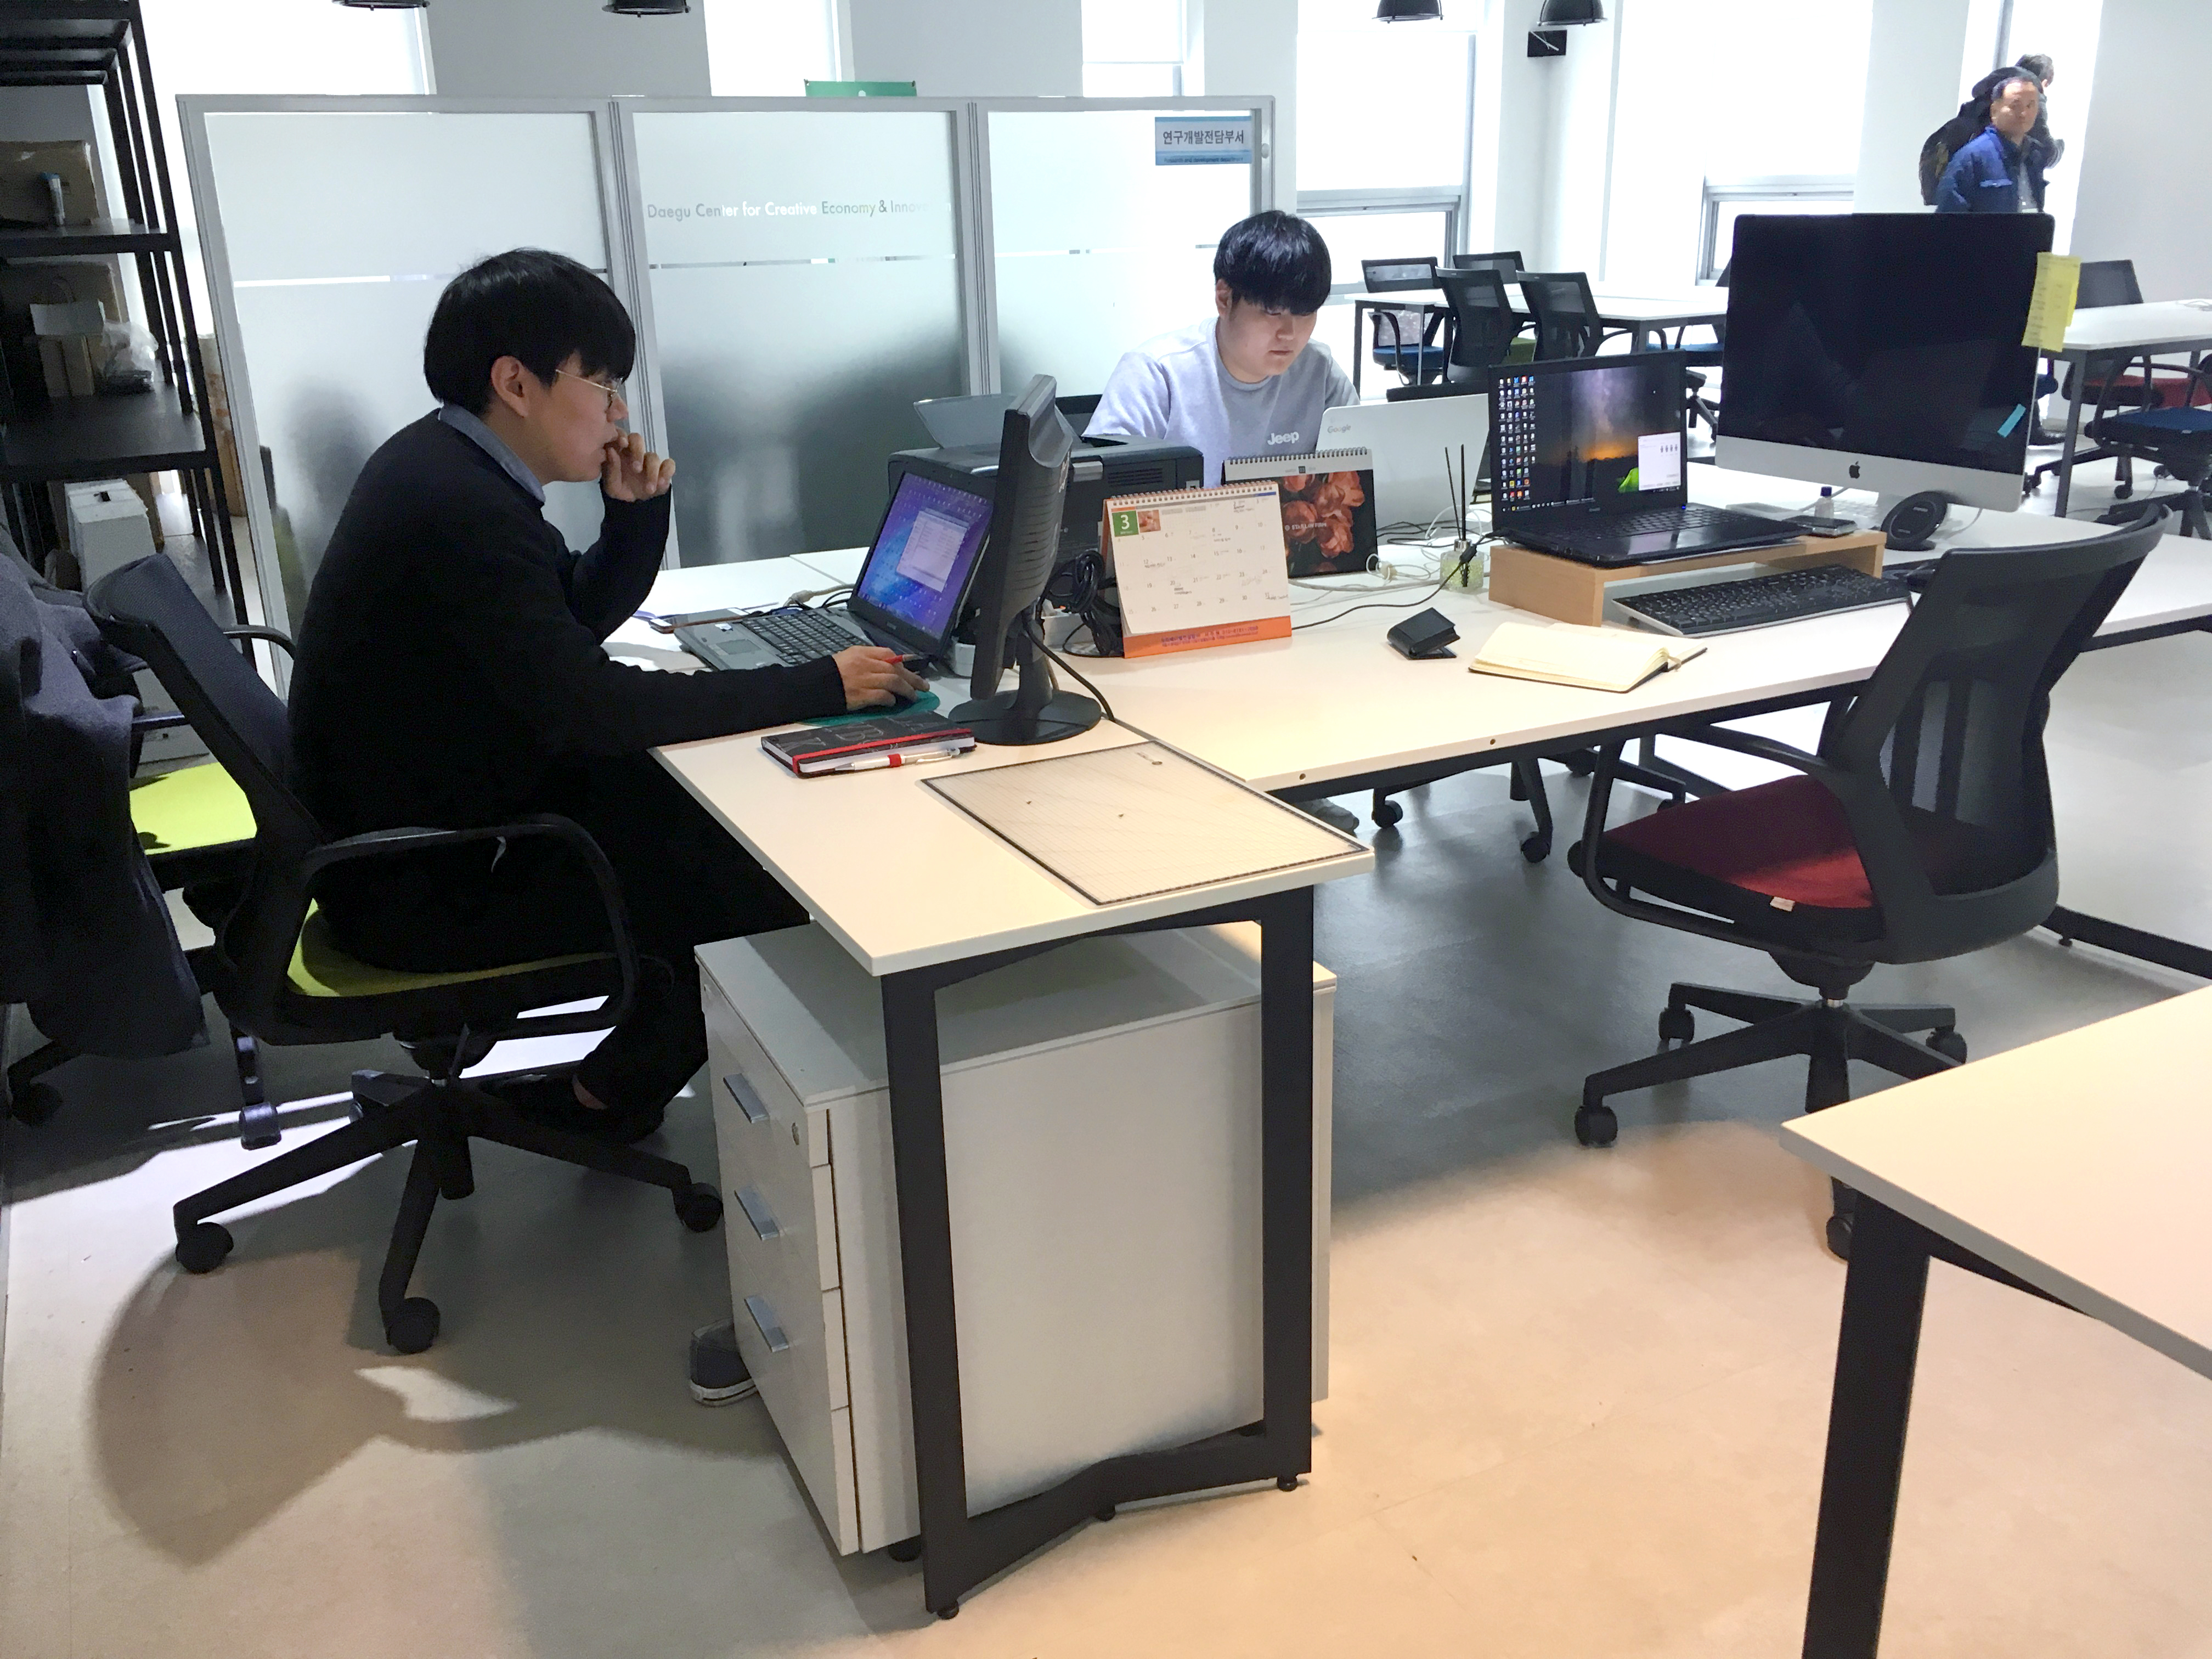 The culture of overwork in South Korea